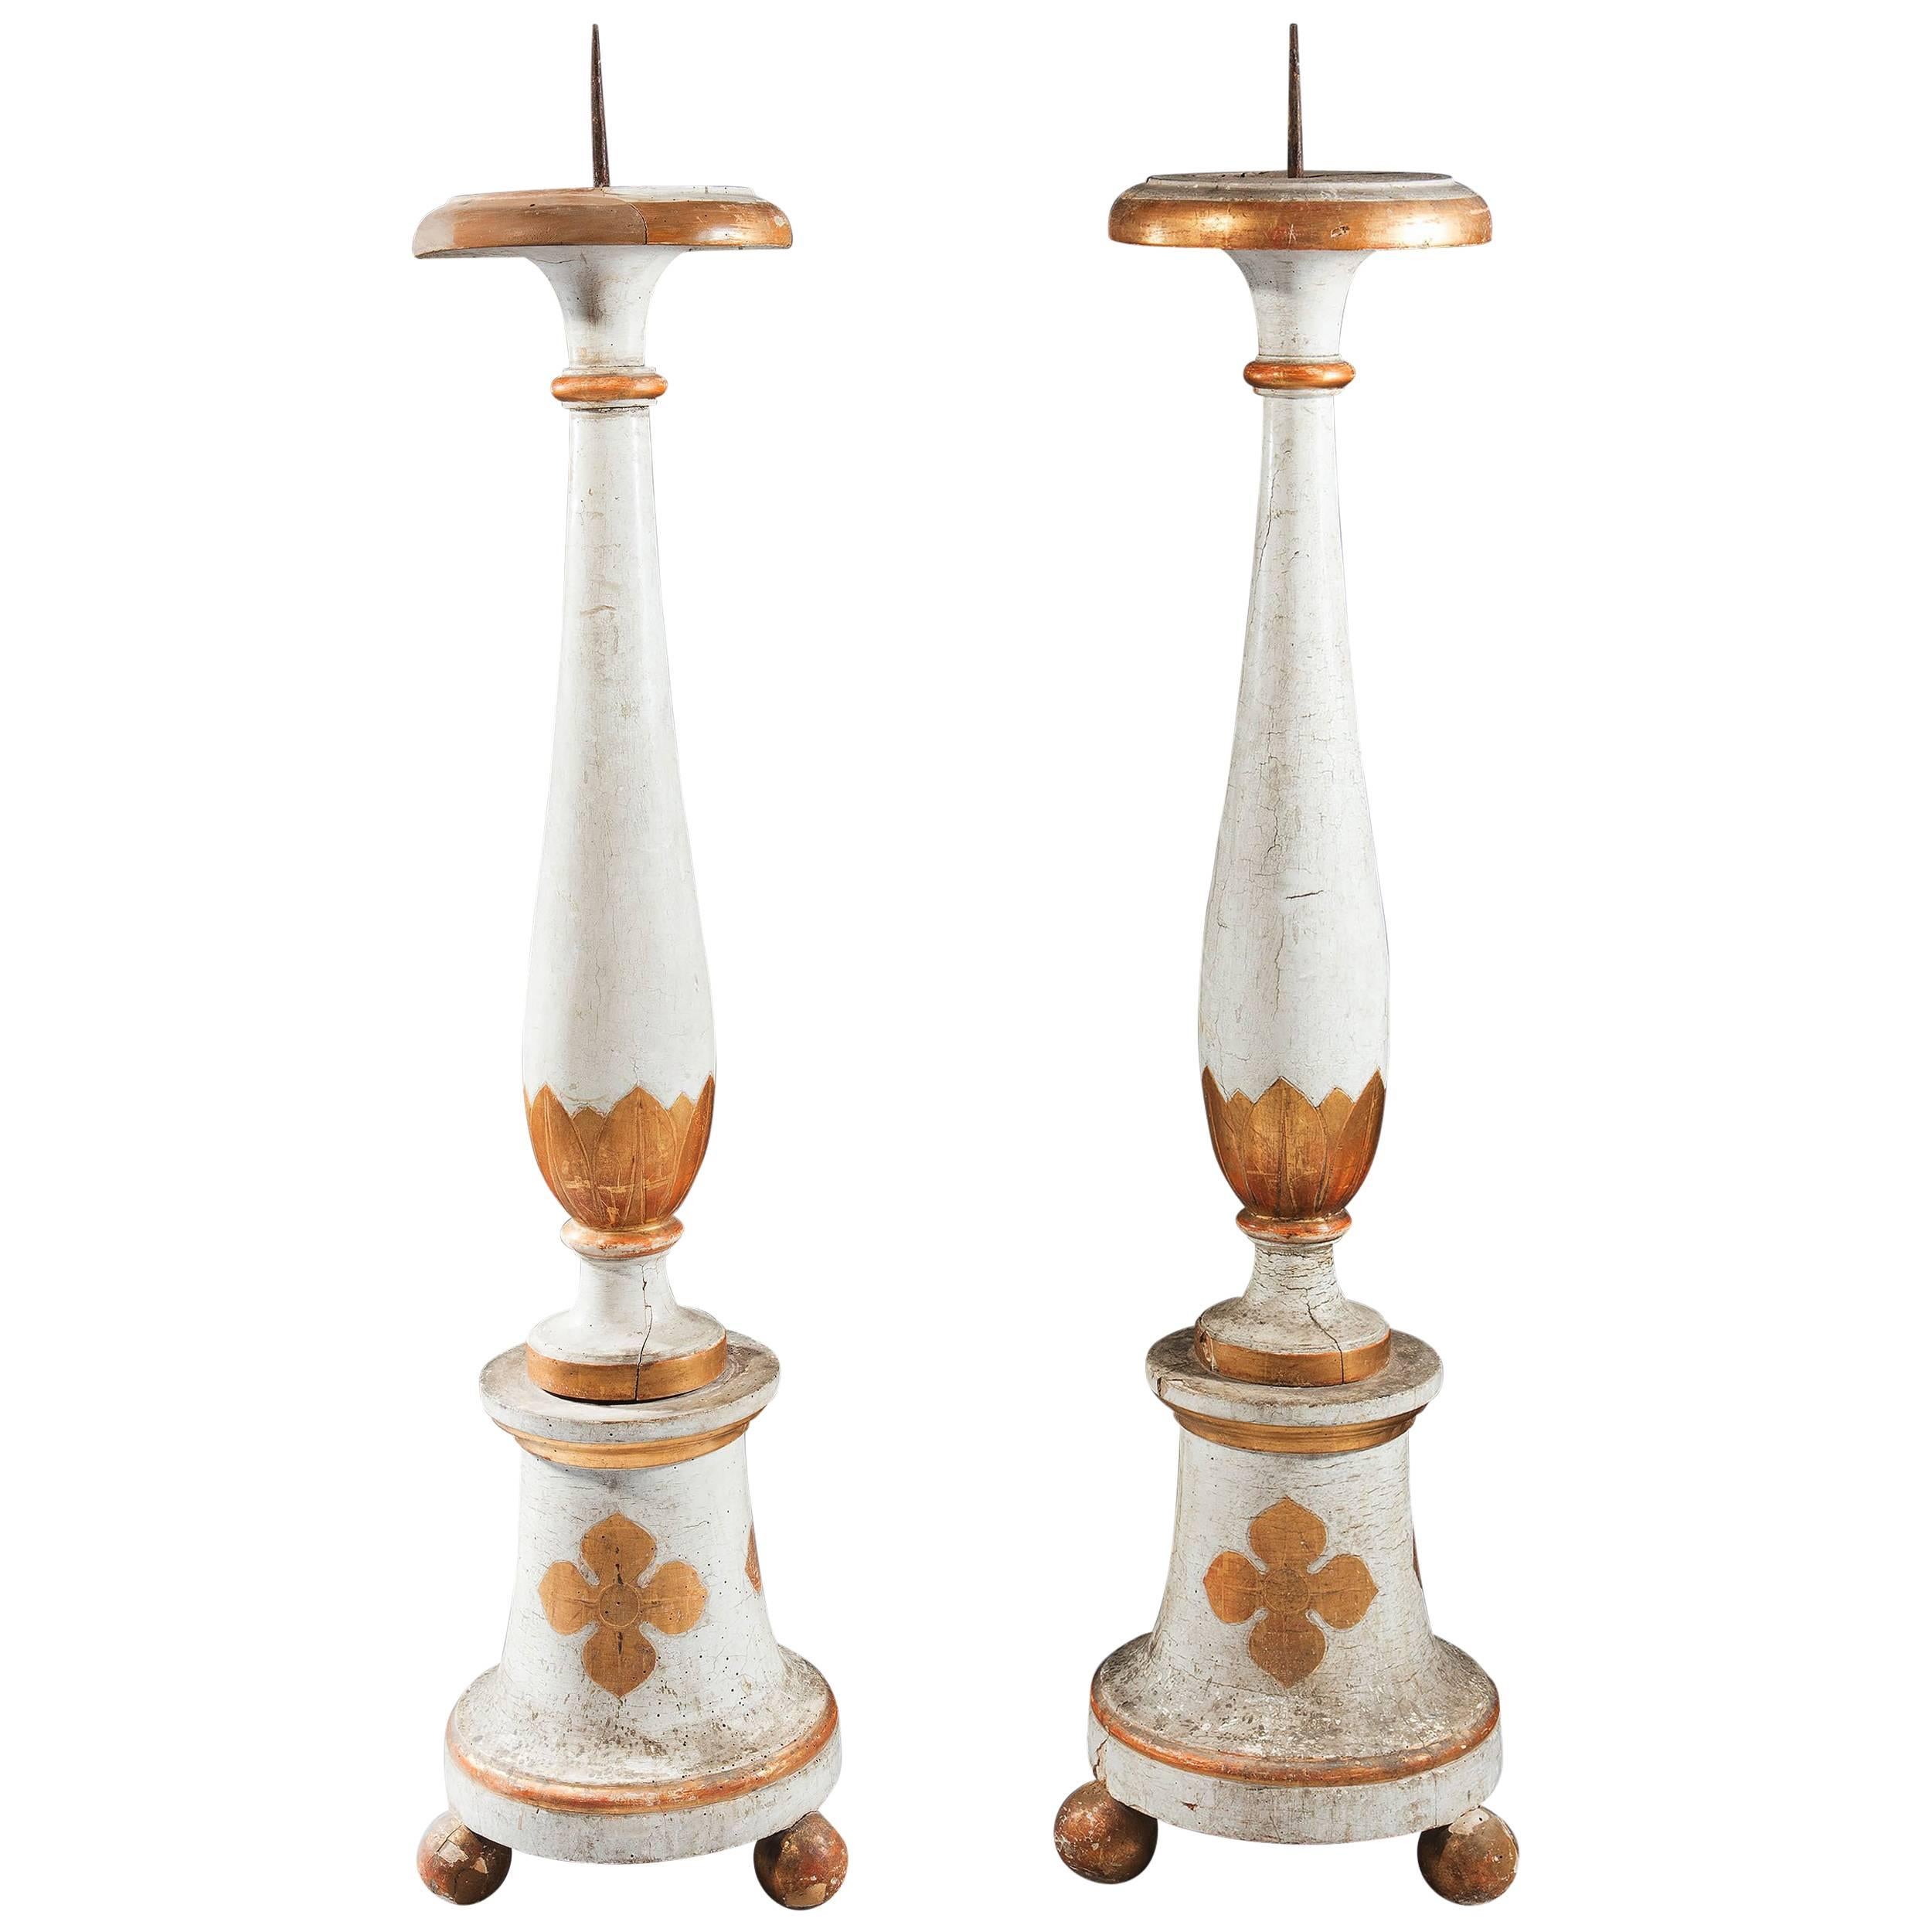 Pair of White and Gold North Italian 18th Century Torcheres